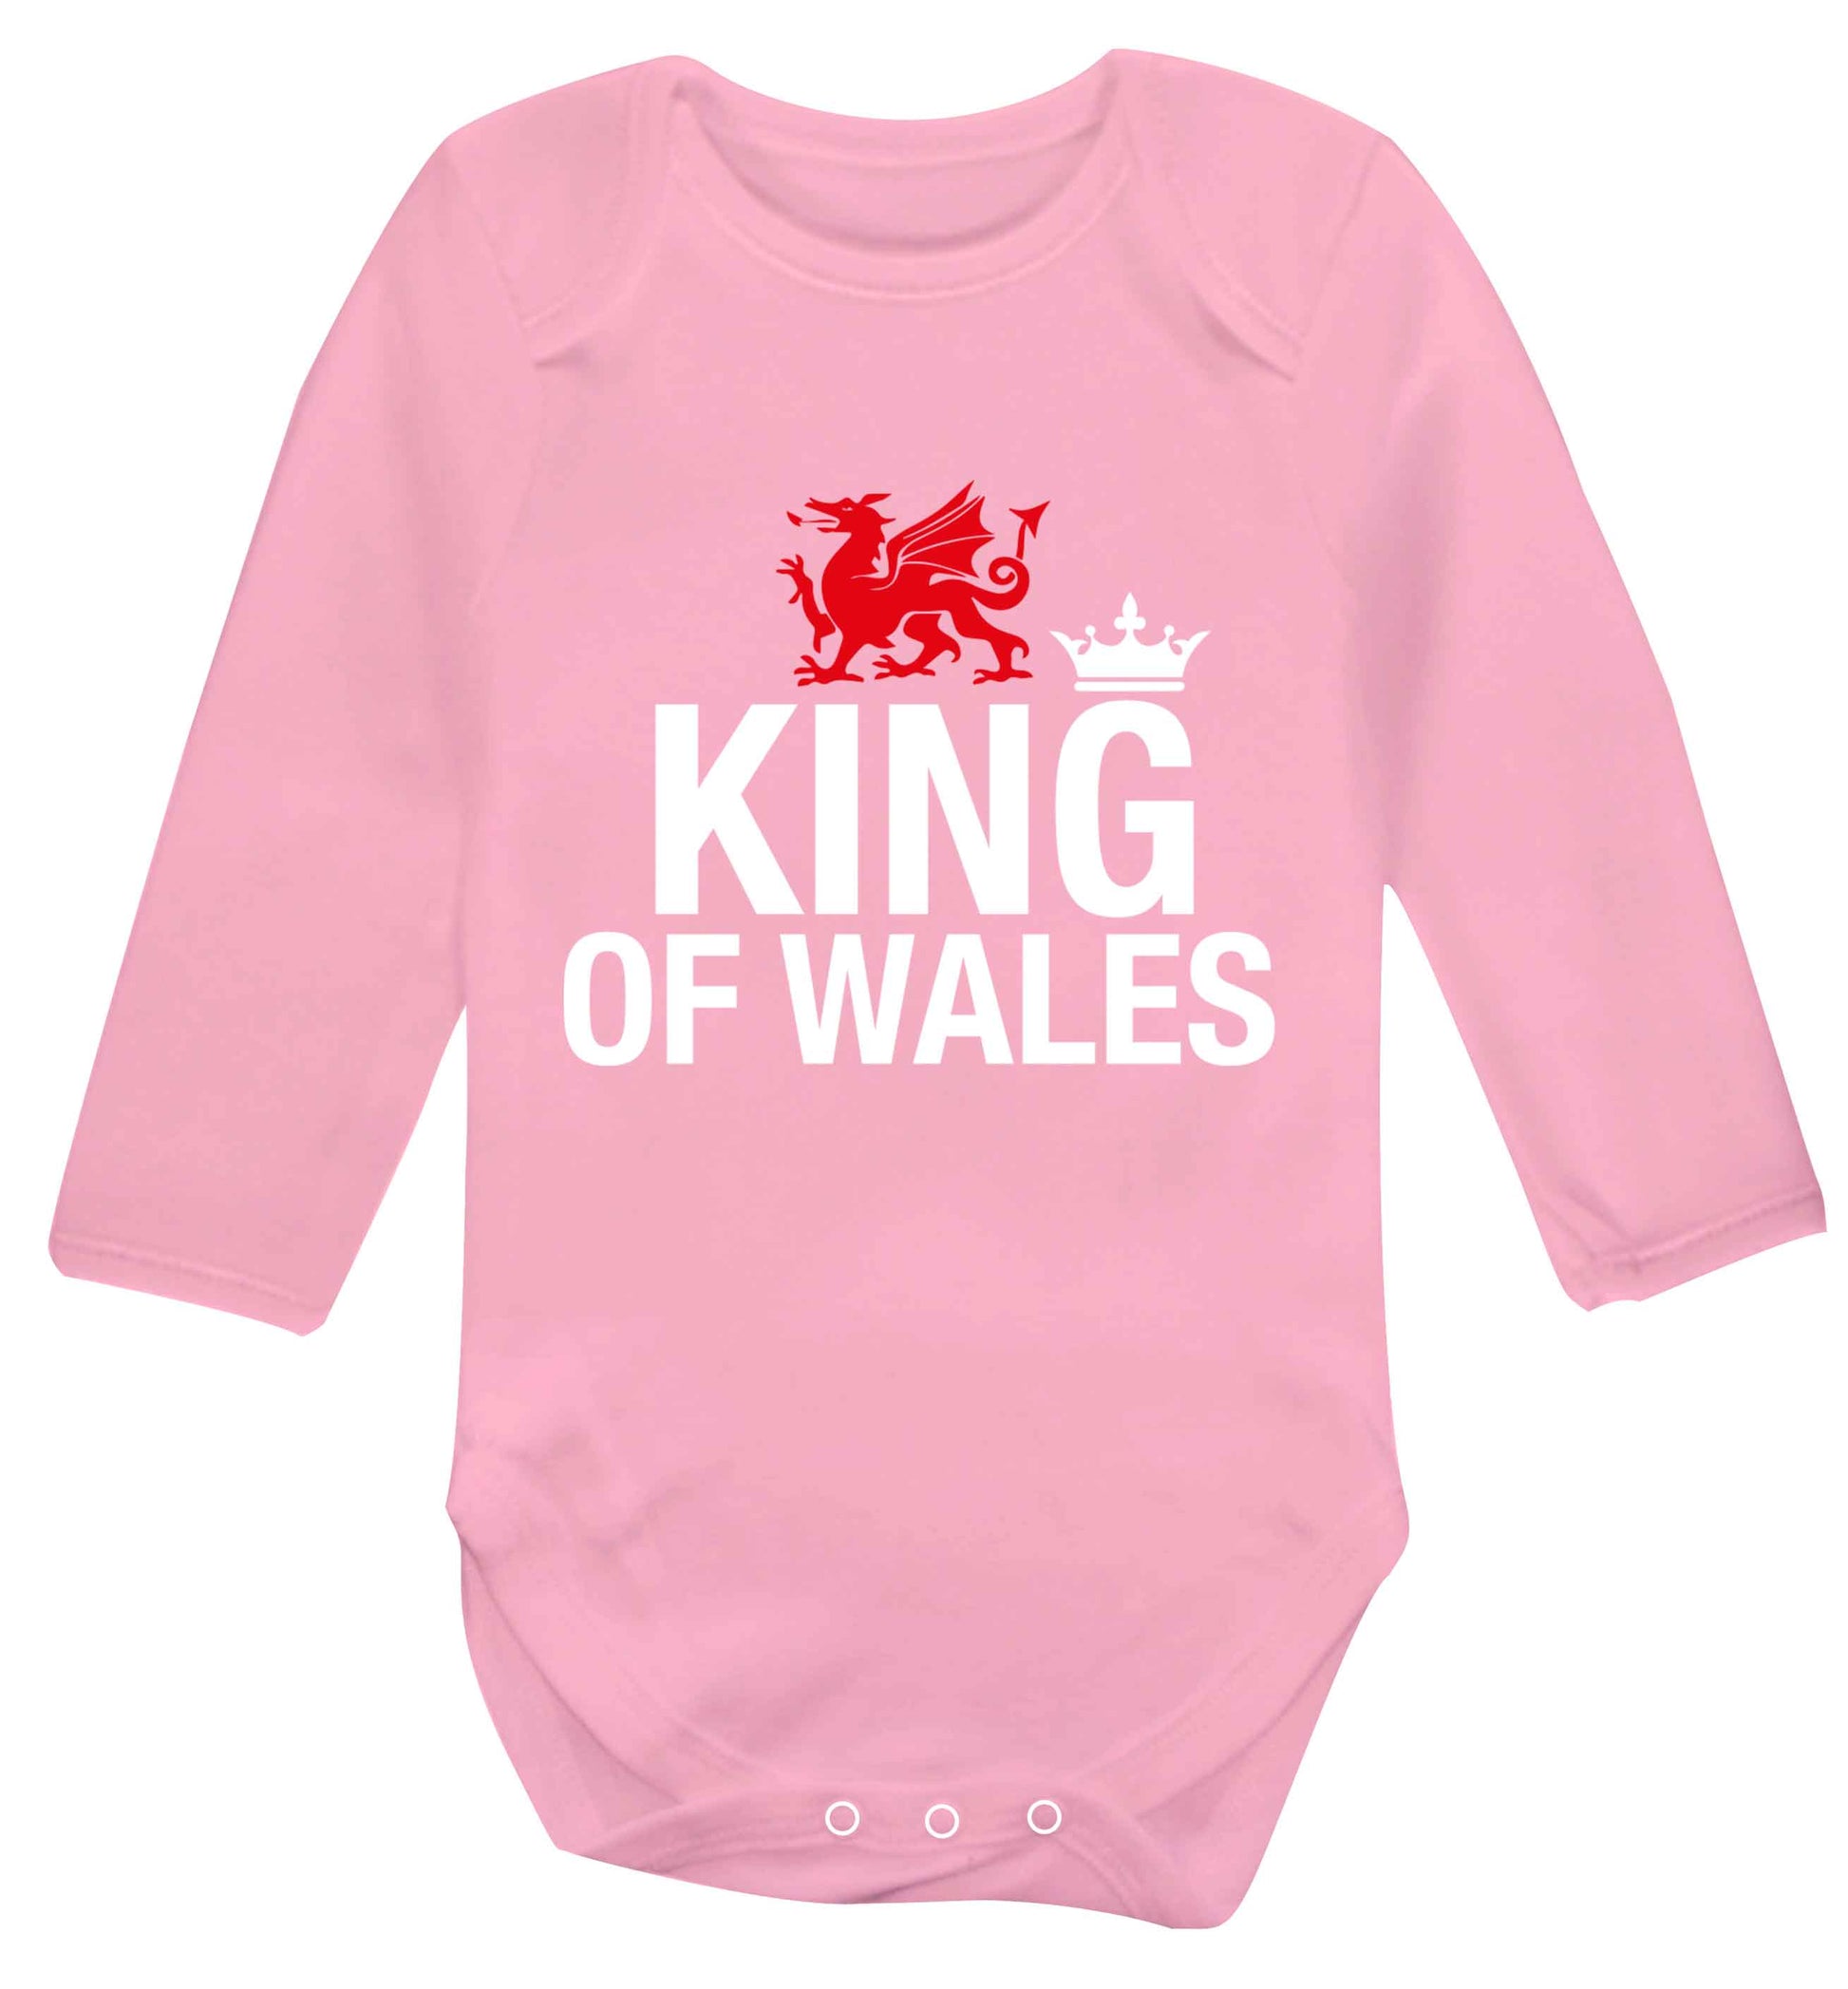 King of Wales Baby Vest long sleeved pale pink 6-12 months